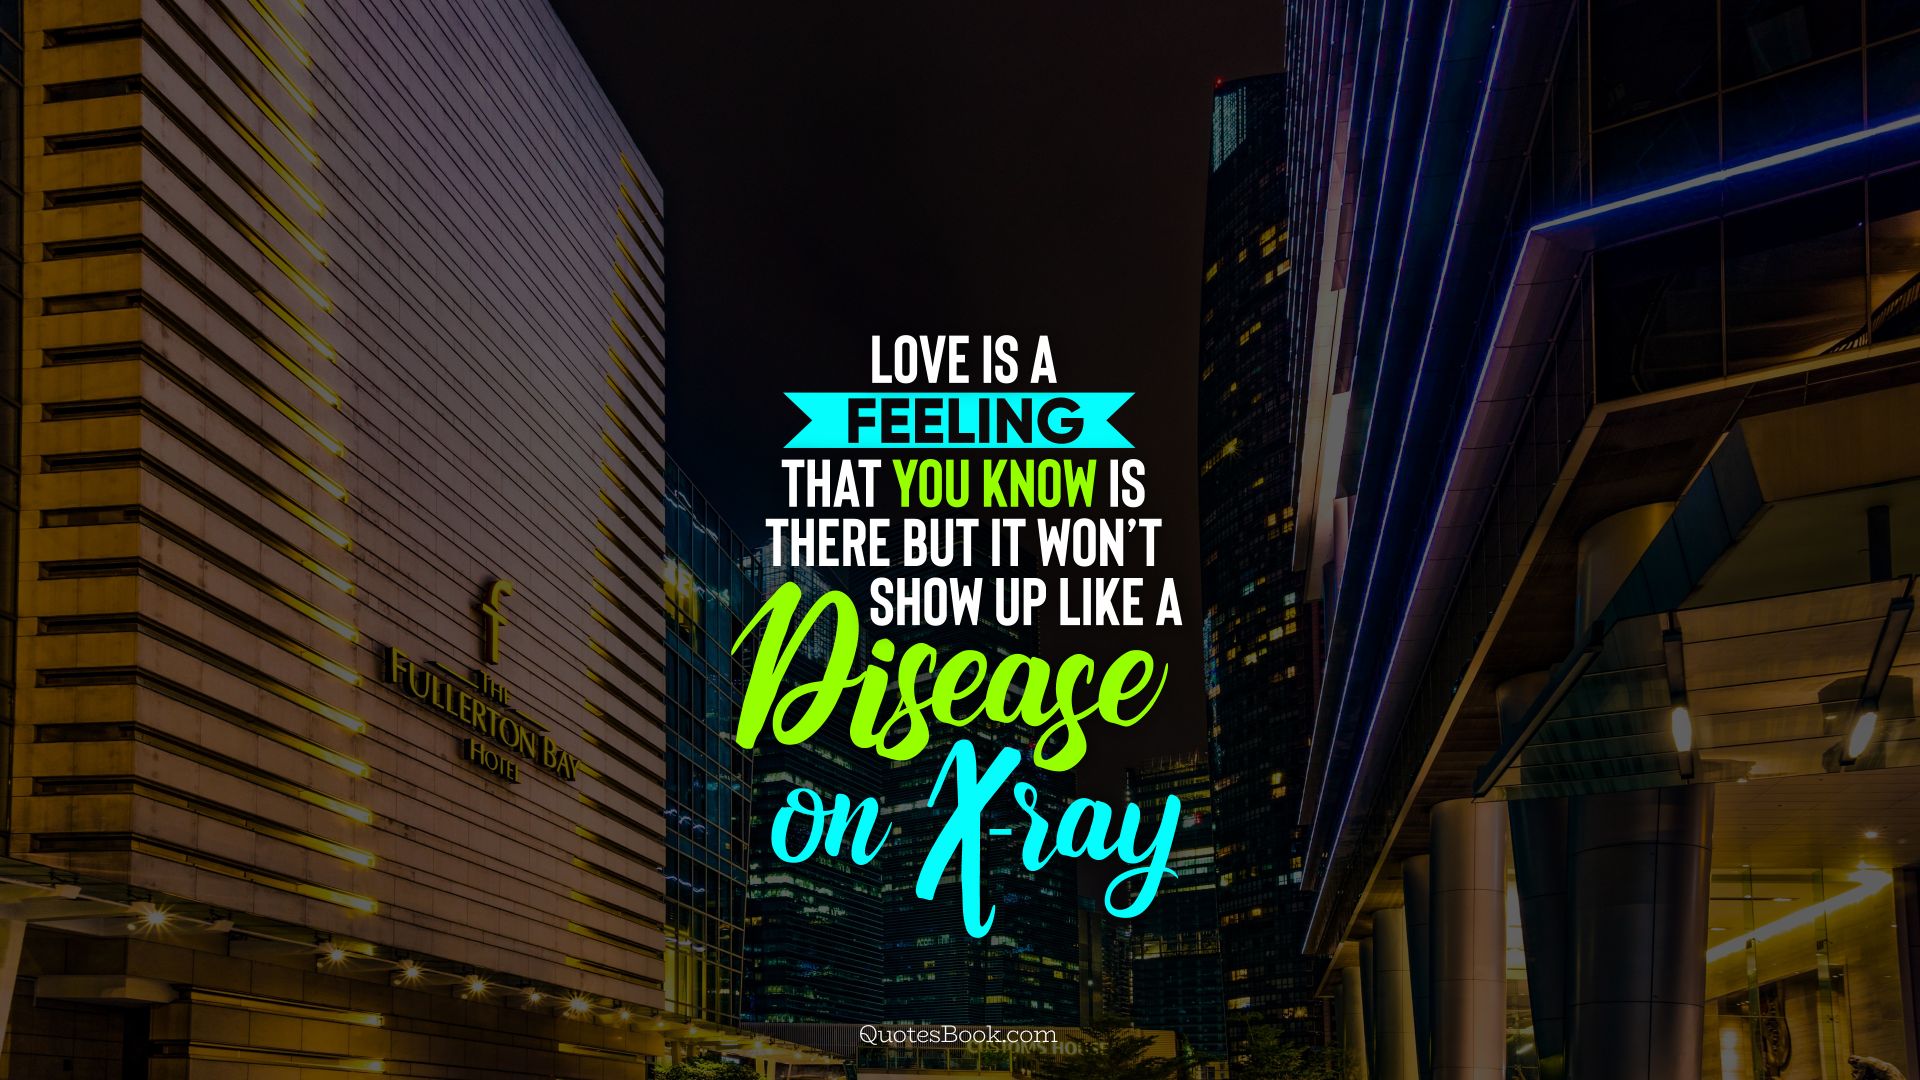 Love is a feeling that you know is there but it won’t show up like a disease on X-ray